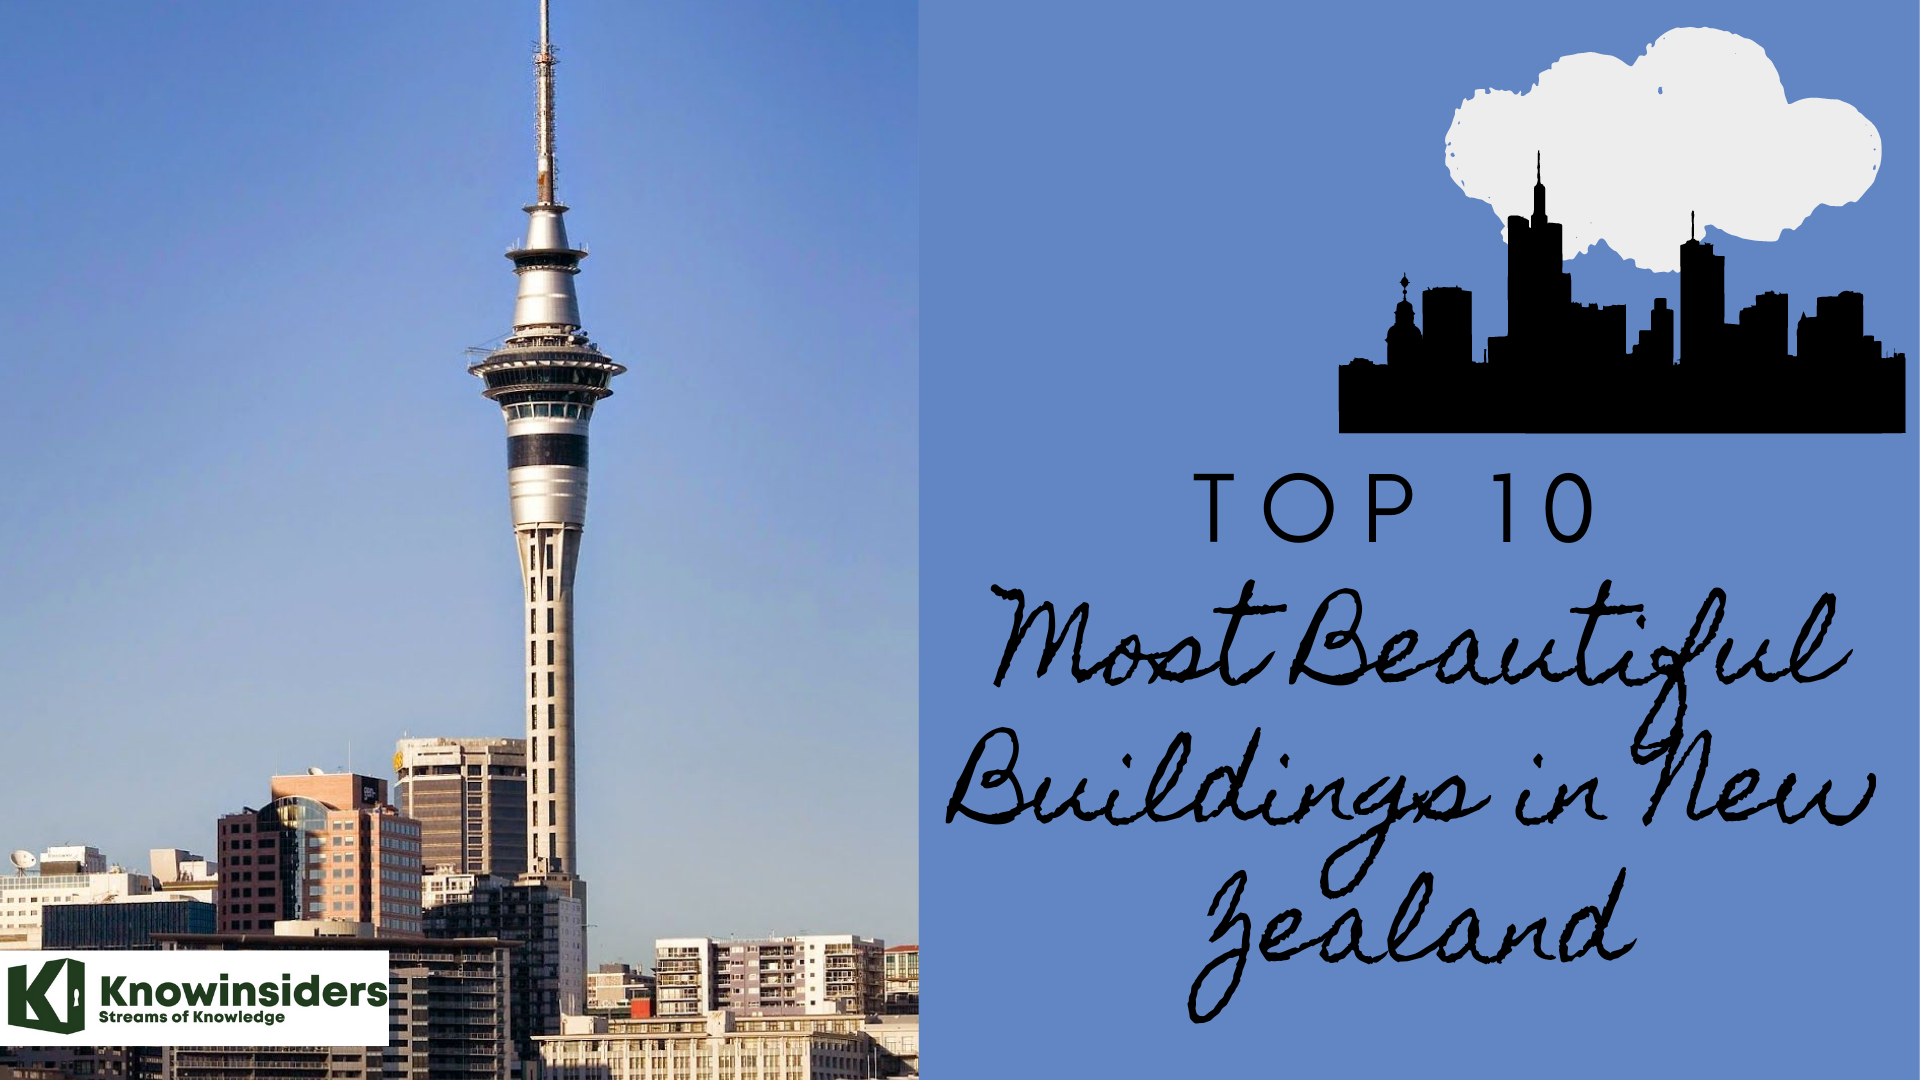 Top 10 Tallest Buildings In New Zealand Today